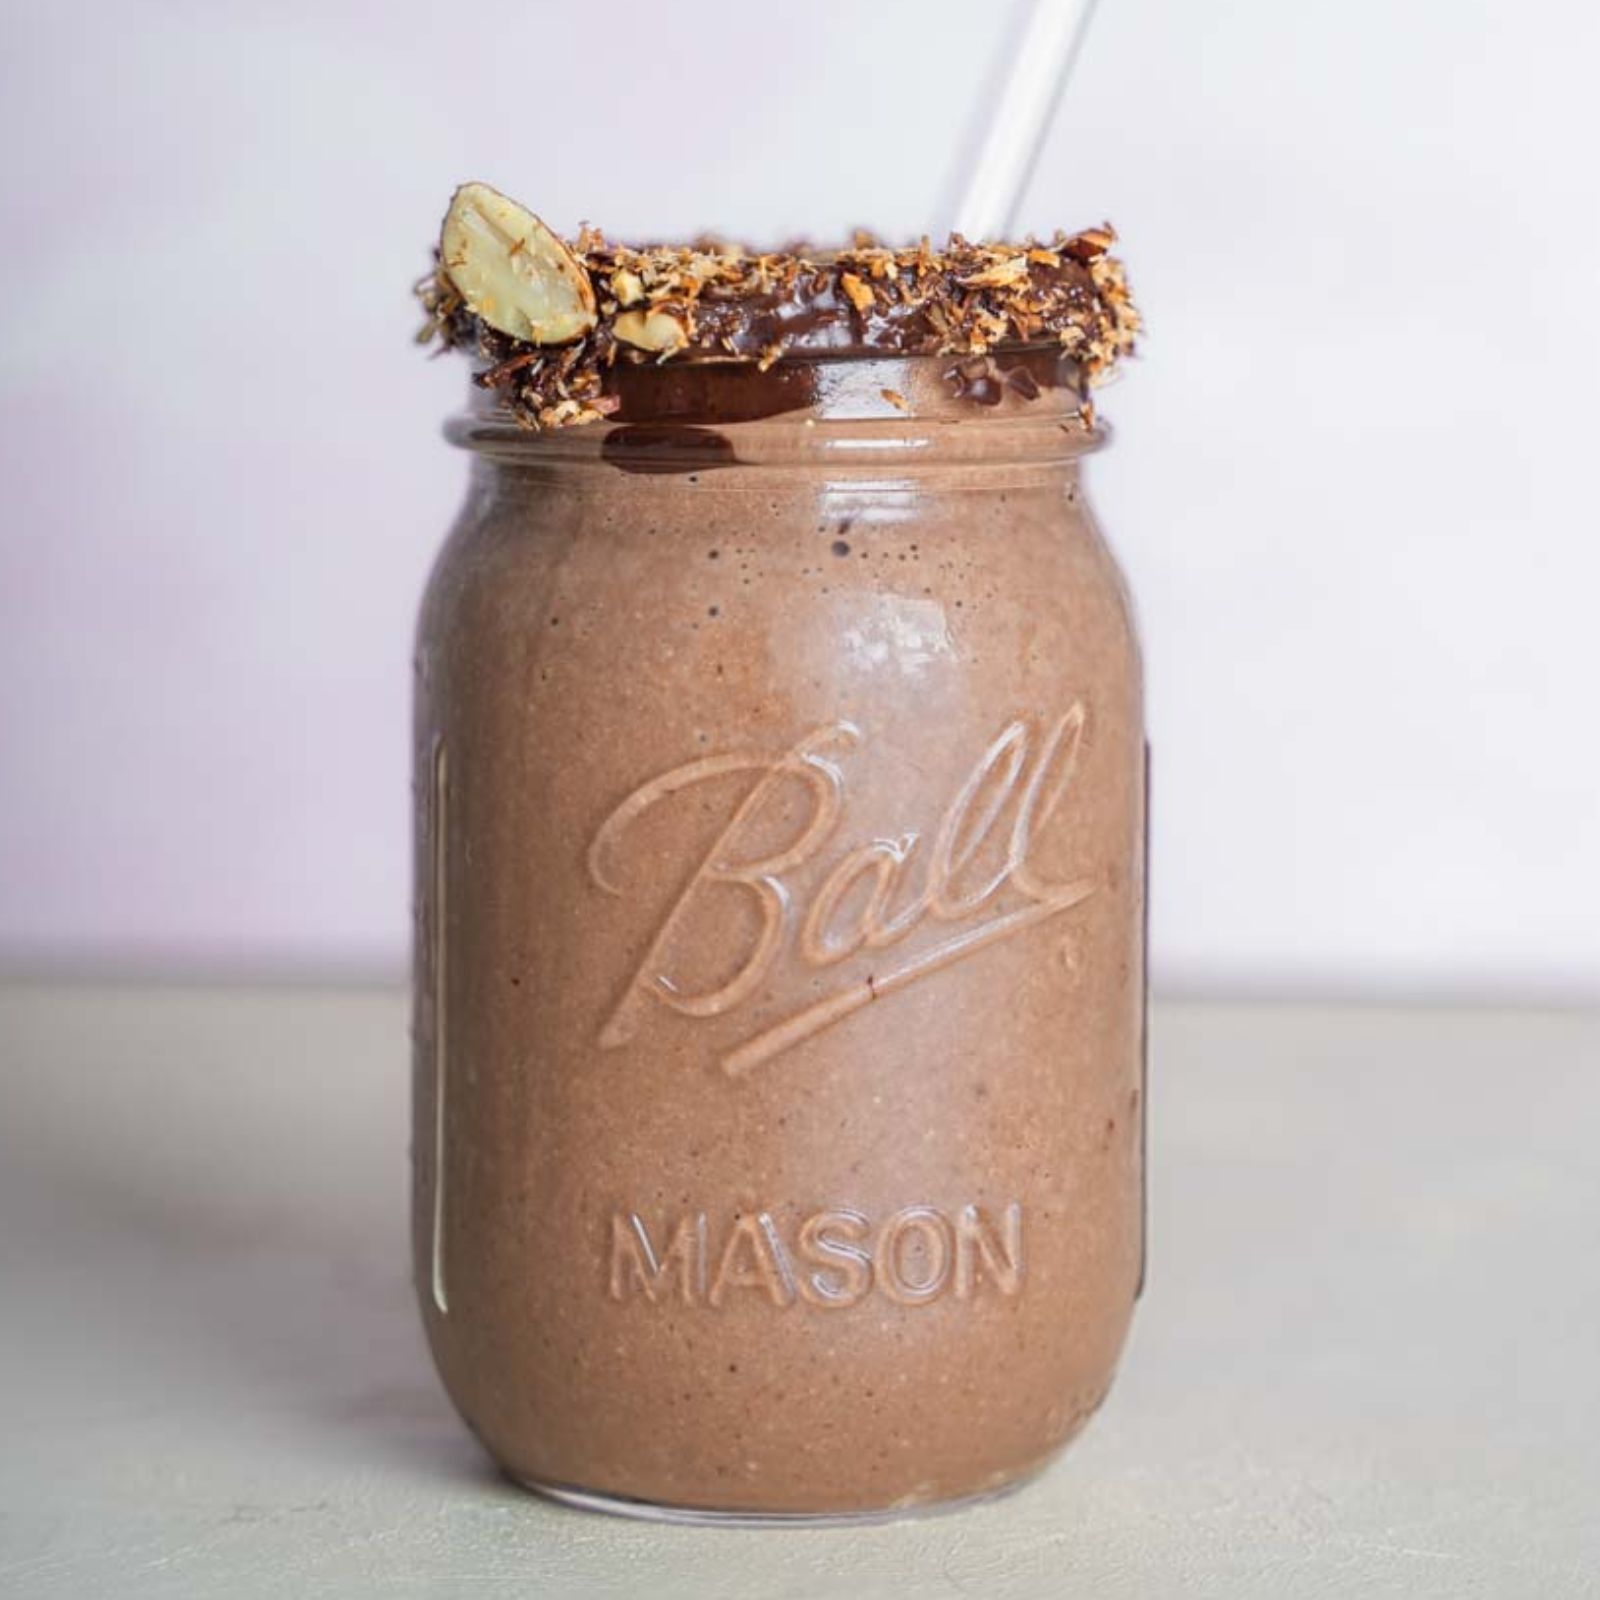 Deep Chocolate Brown Smoothie with a toasted nut rim